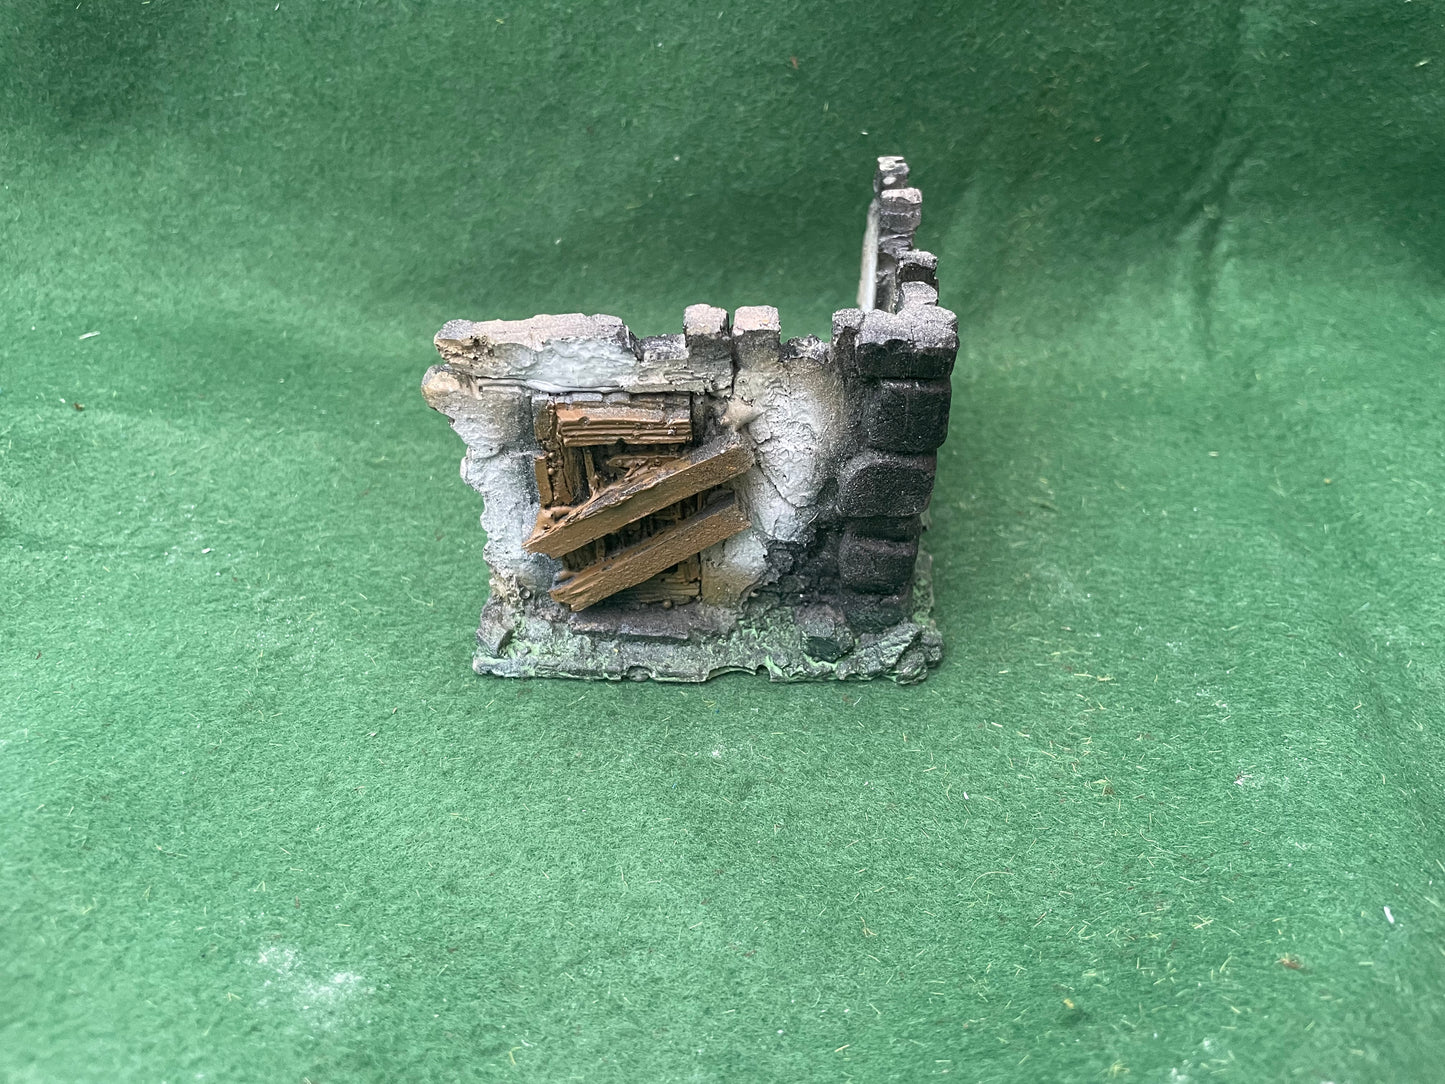 Ruined Tavern/Lords dwelling